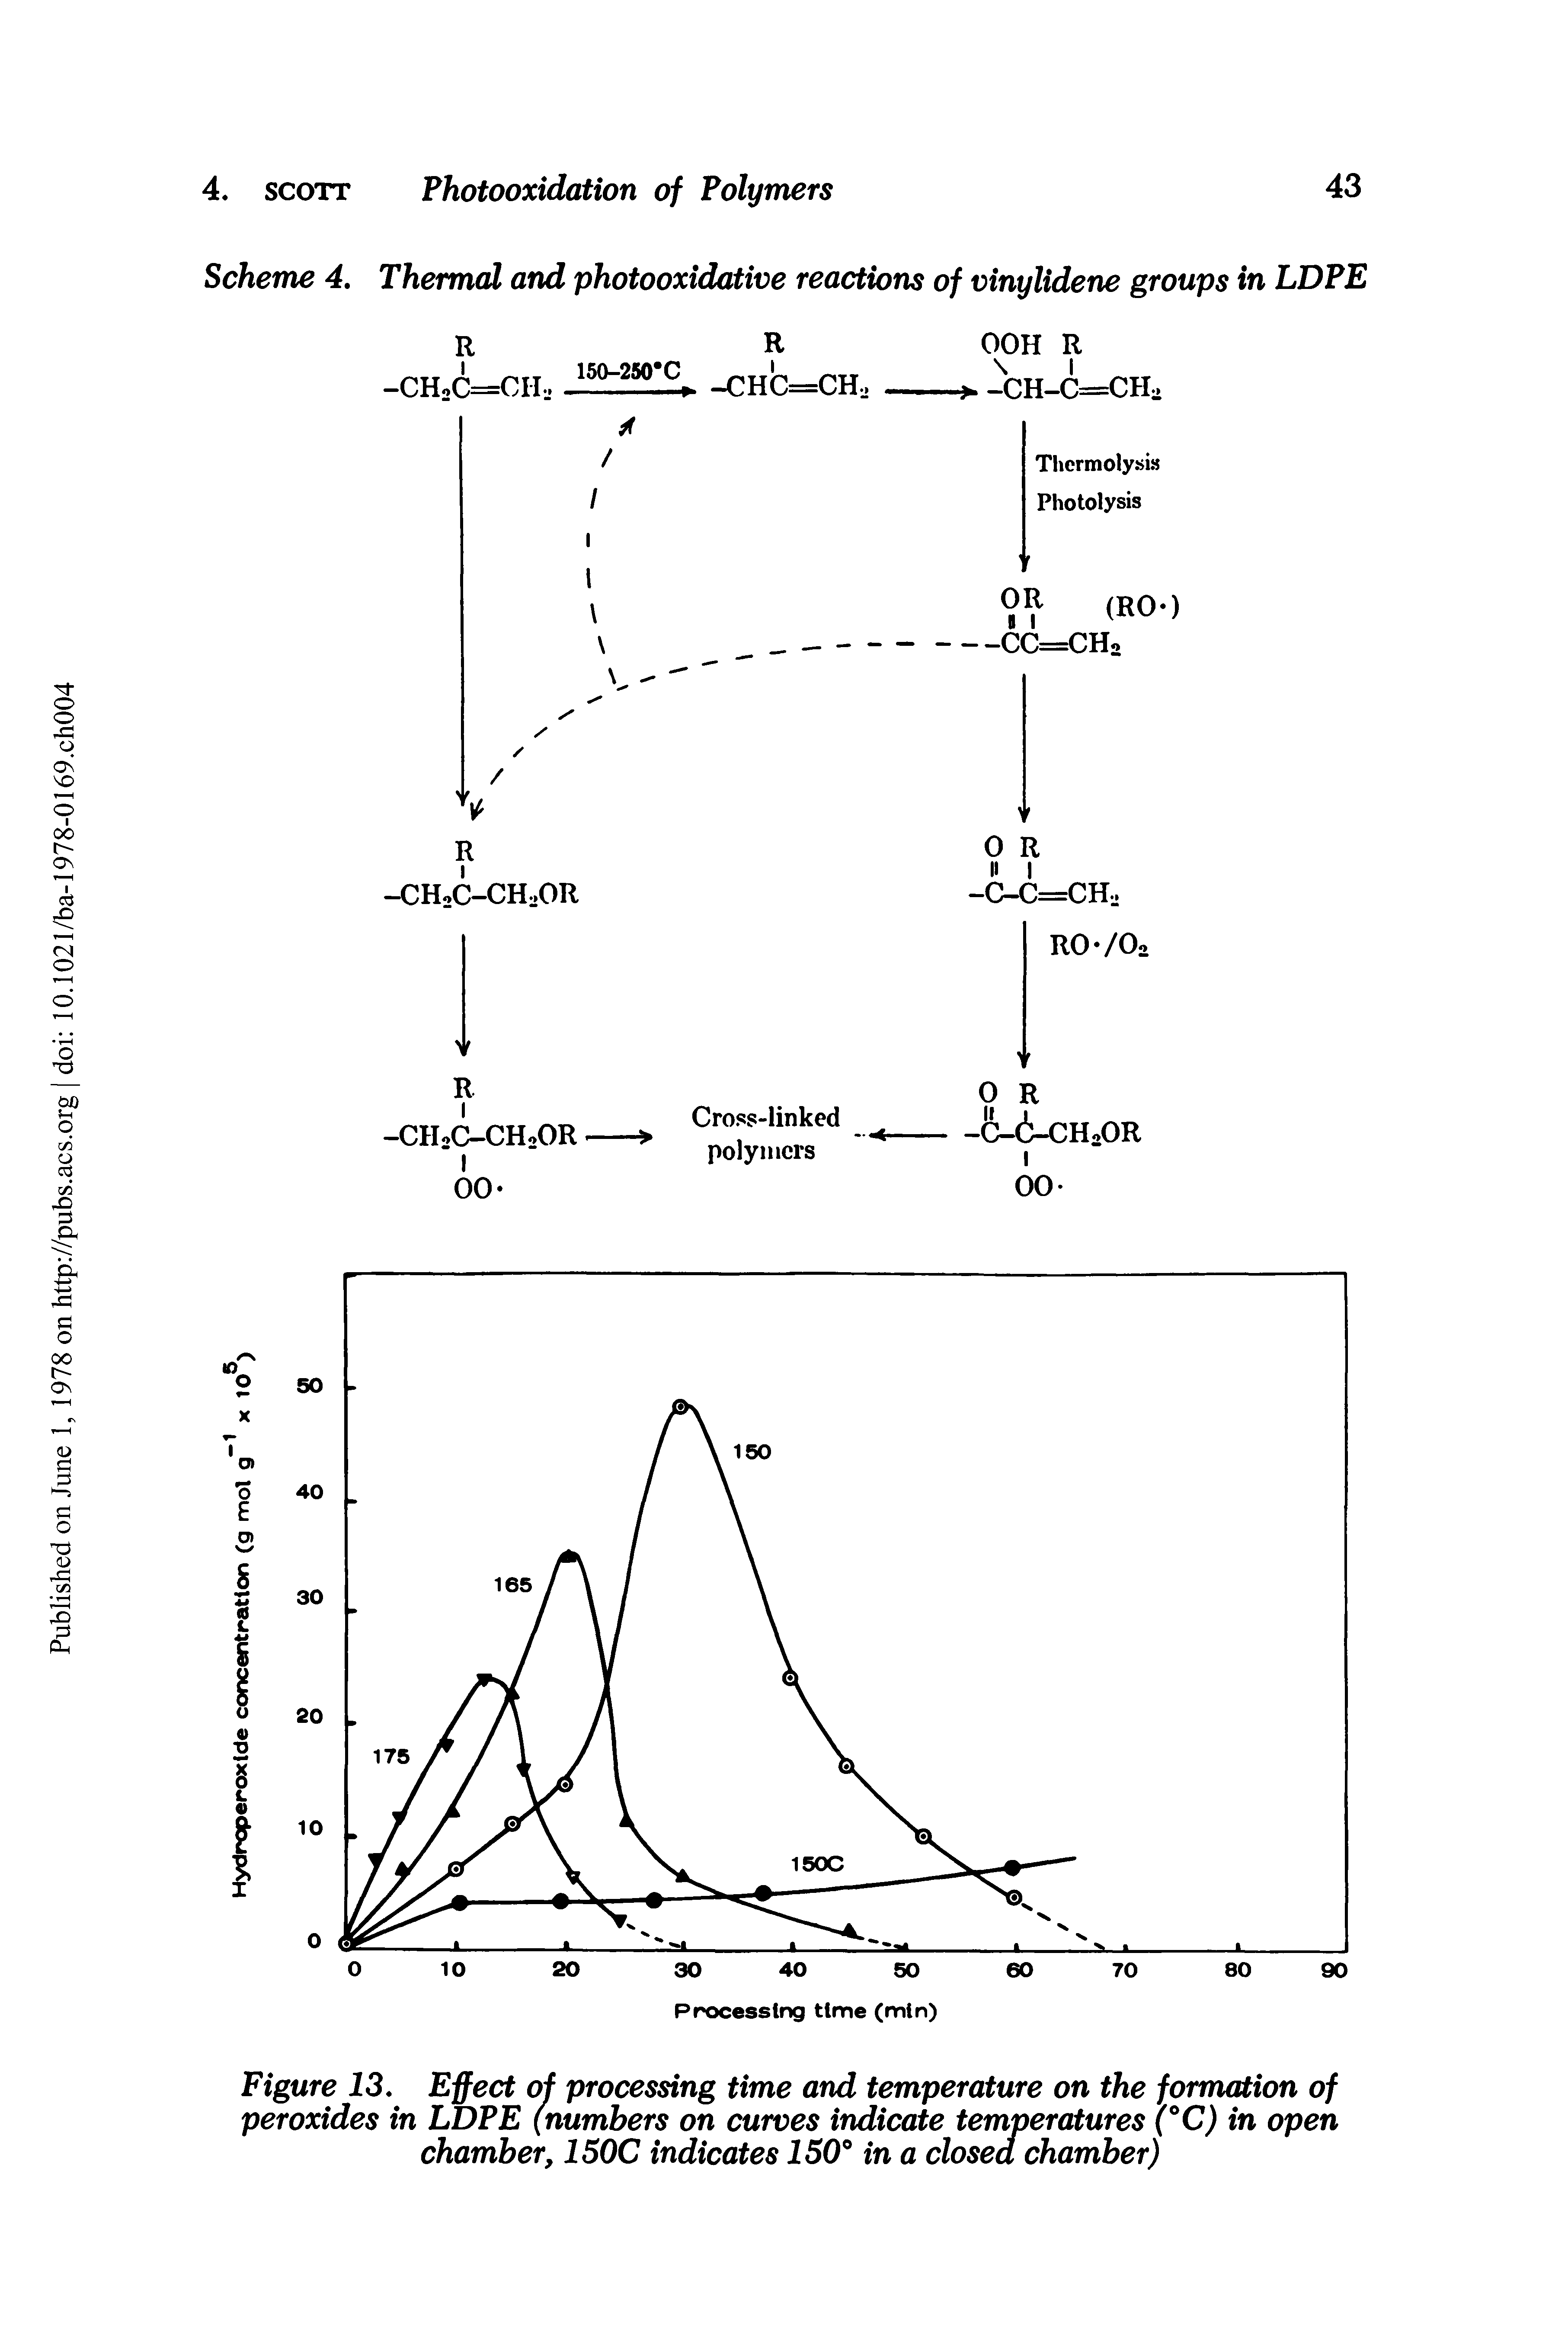 Figure 13. Effect of processing time and temperature on the formation of peroxides in LDPE (numbers on curves indicate temperatures (°C) in open chamber, 150C indicates 150° in a closed chamber)...